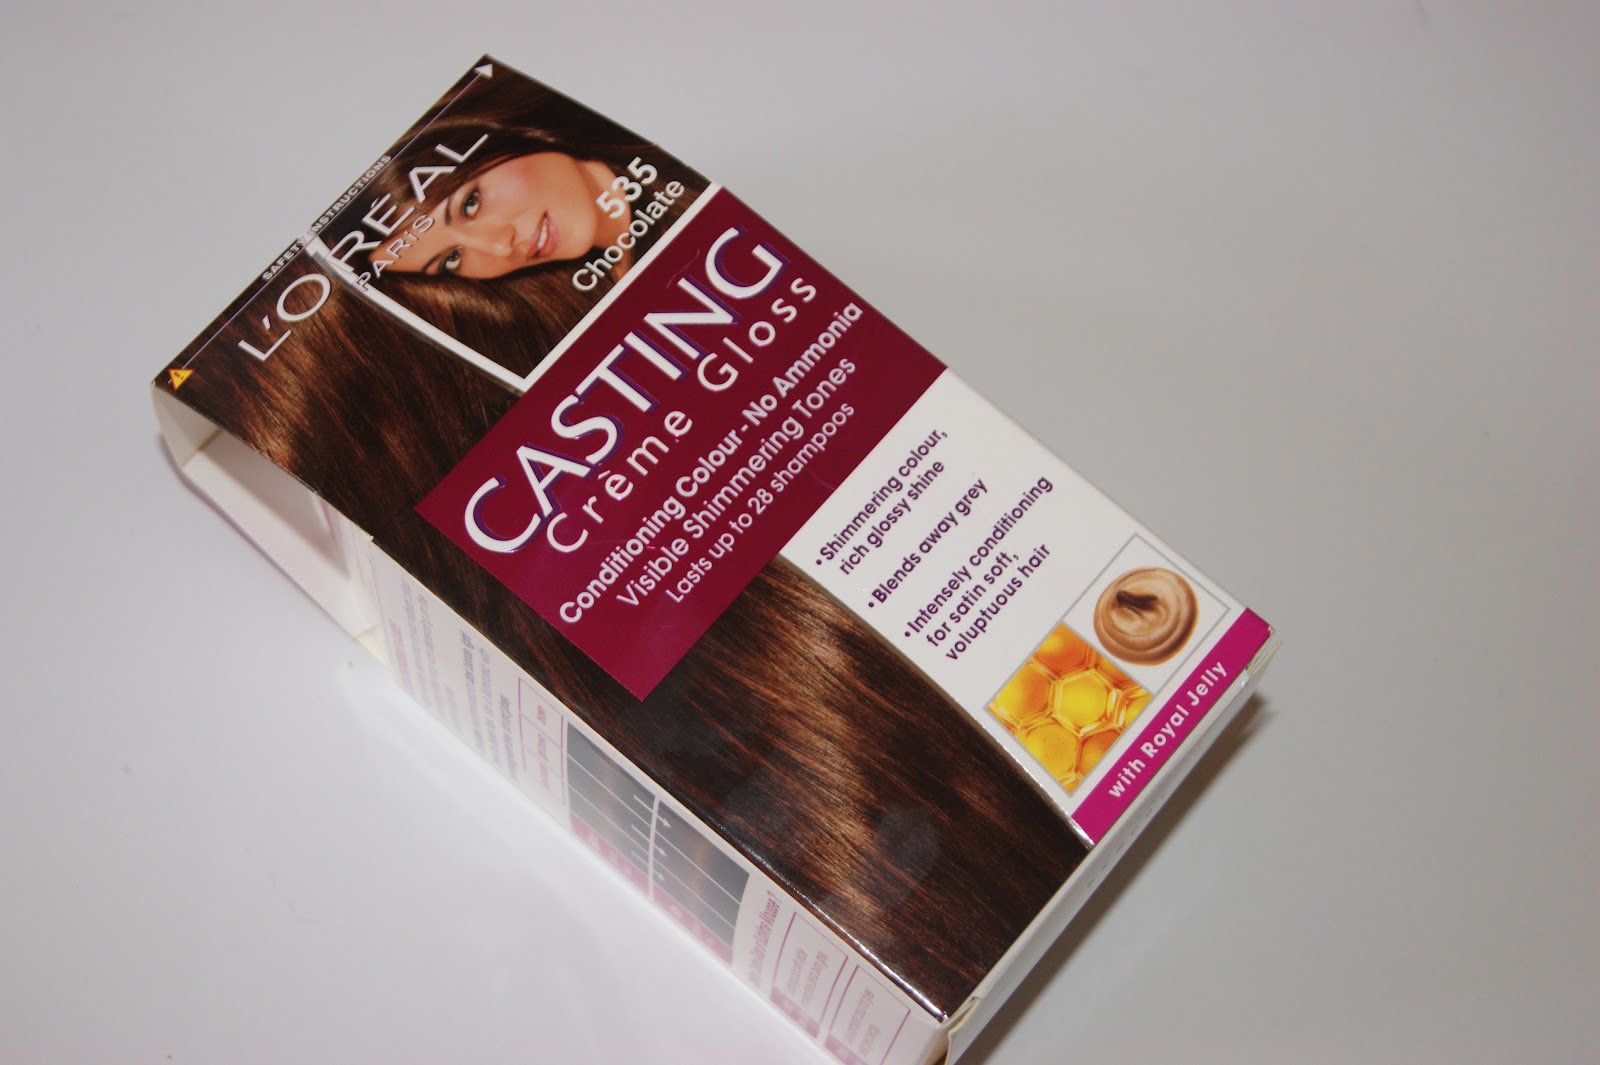 L'Oreal Casting Creme in Chocolate - Review